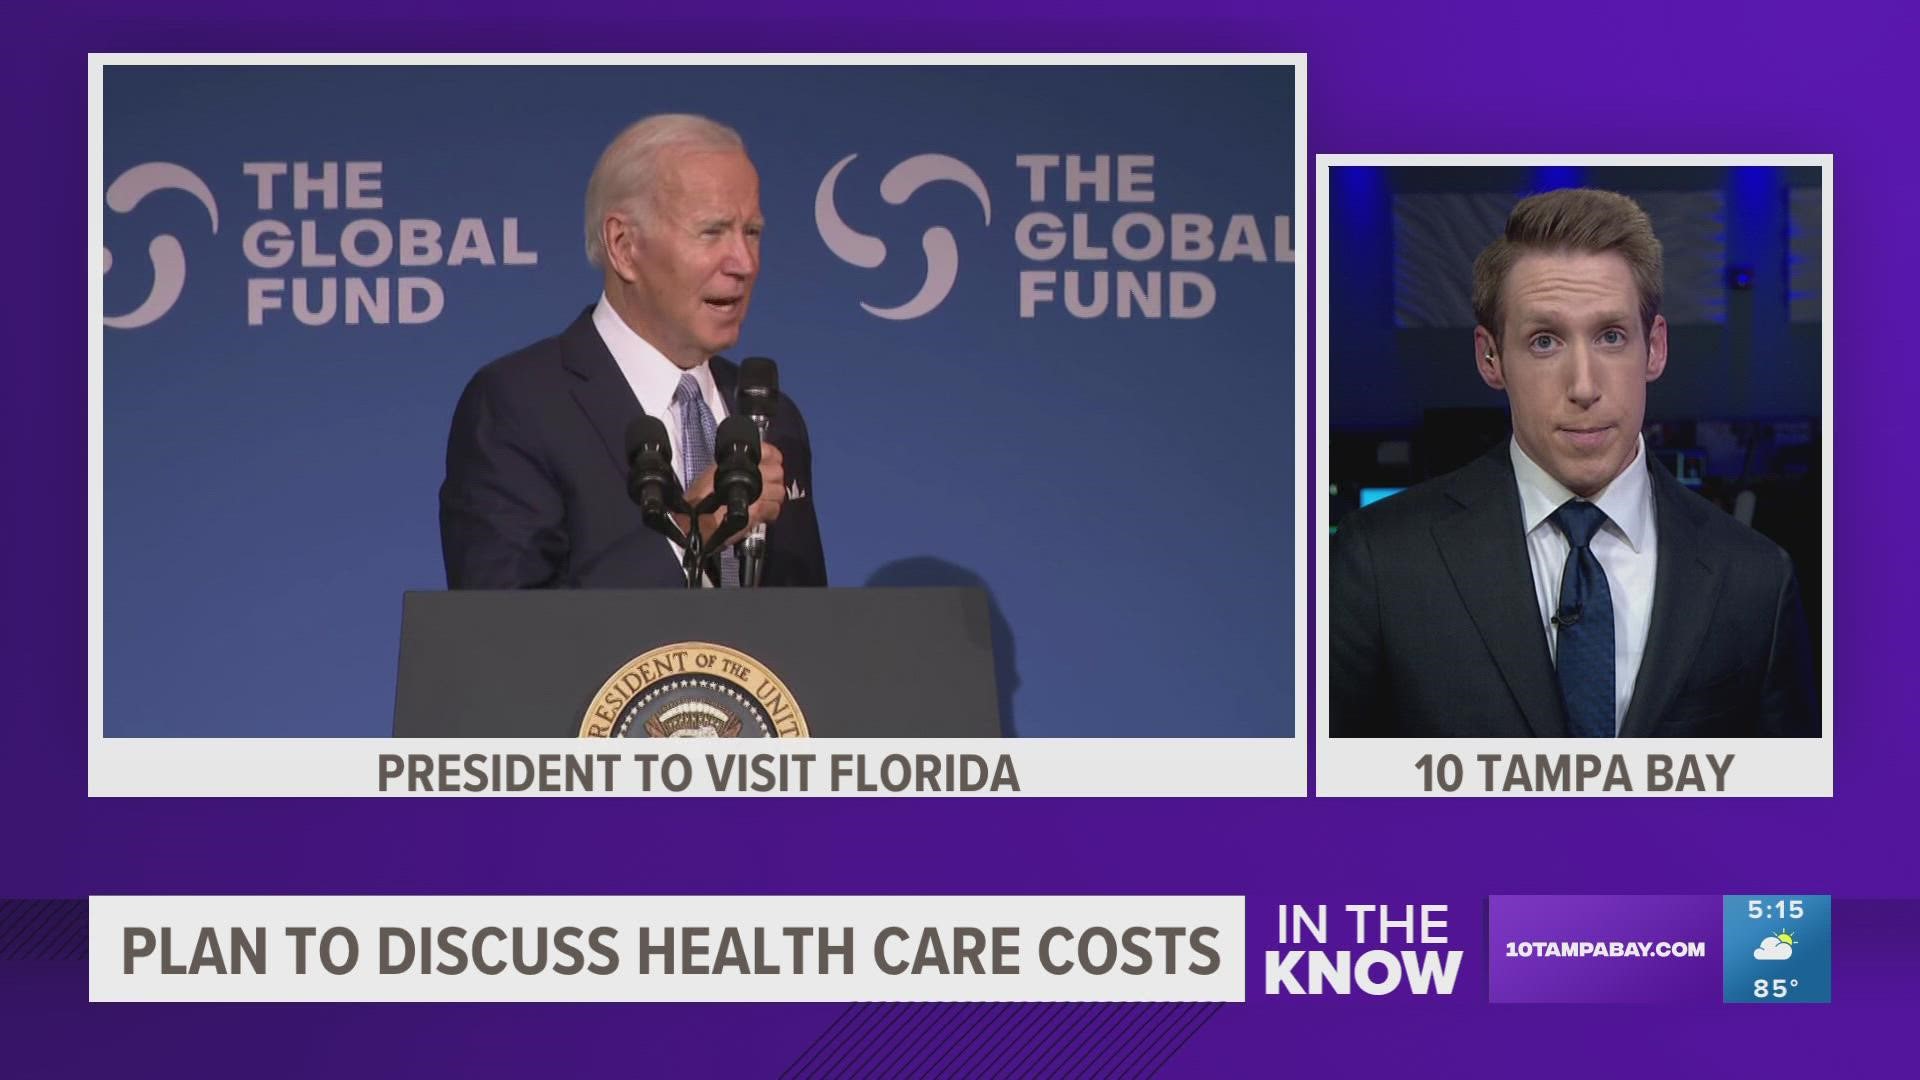 Dependent on the weather, Biden will travel to Fort Lauderdale on Sept. 27.